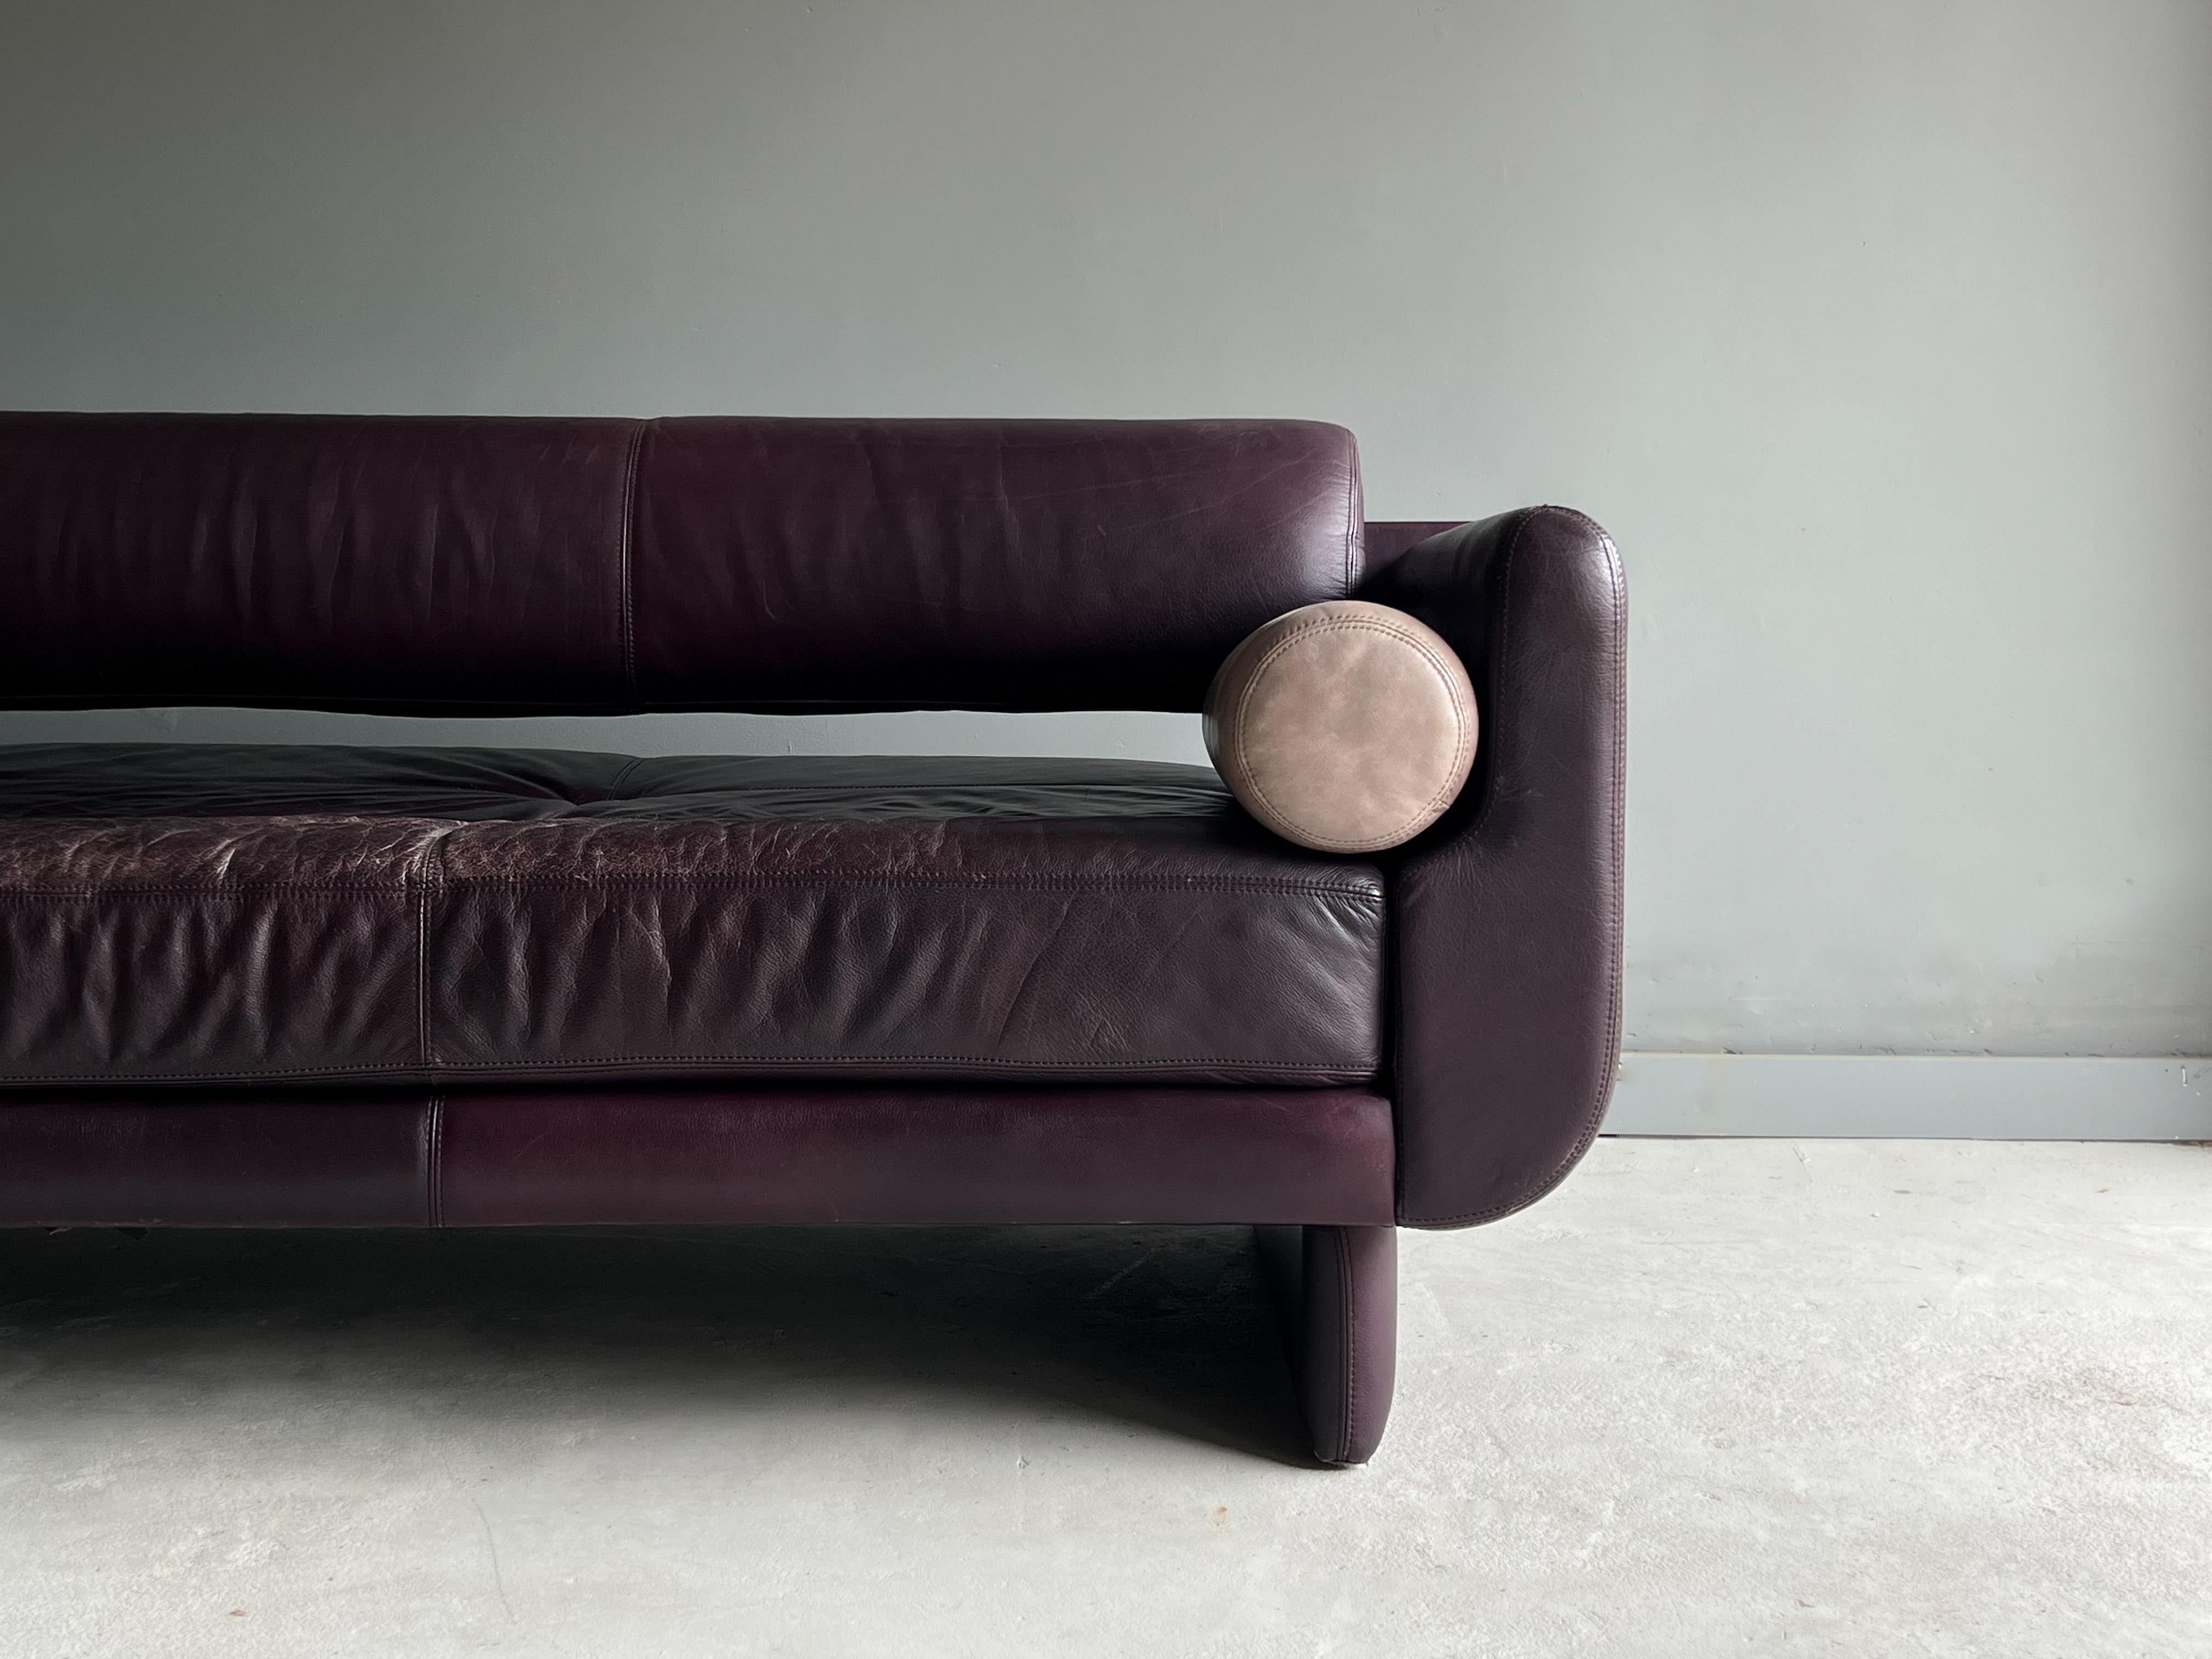 Post-Modern Beautiful “Matinee” Sofa / Daybed by Vladimir Kagan for American Leather